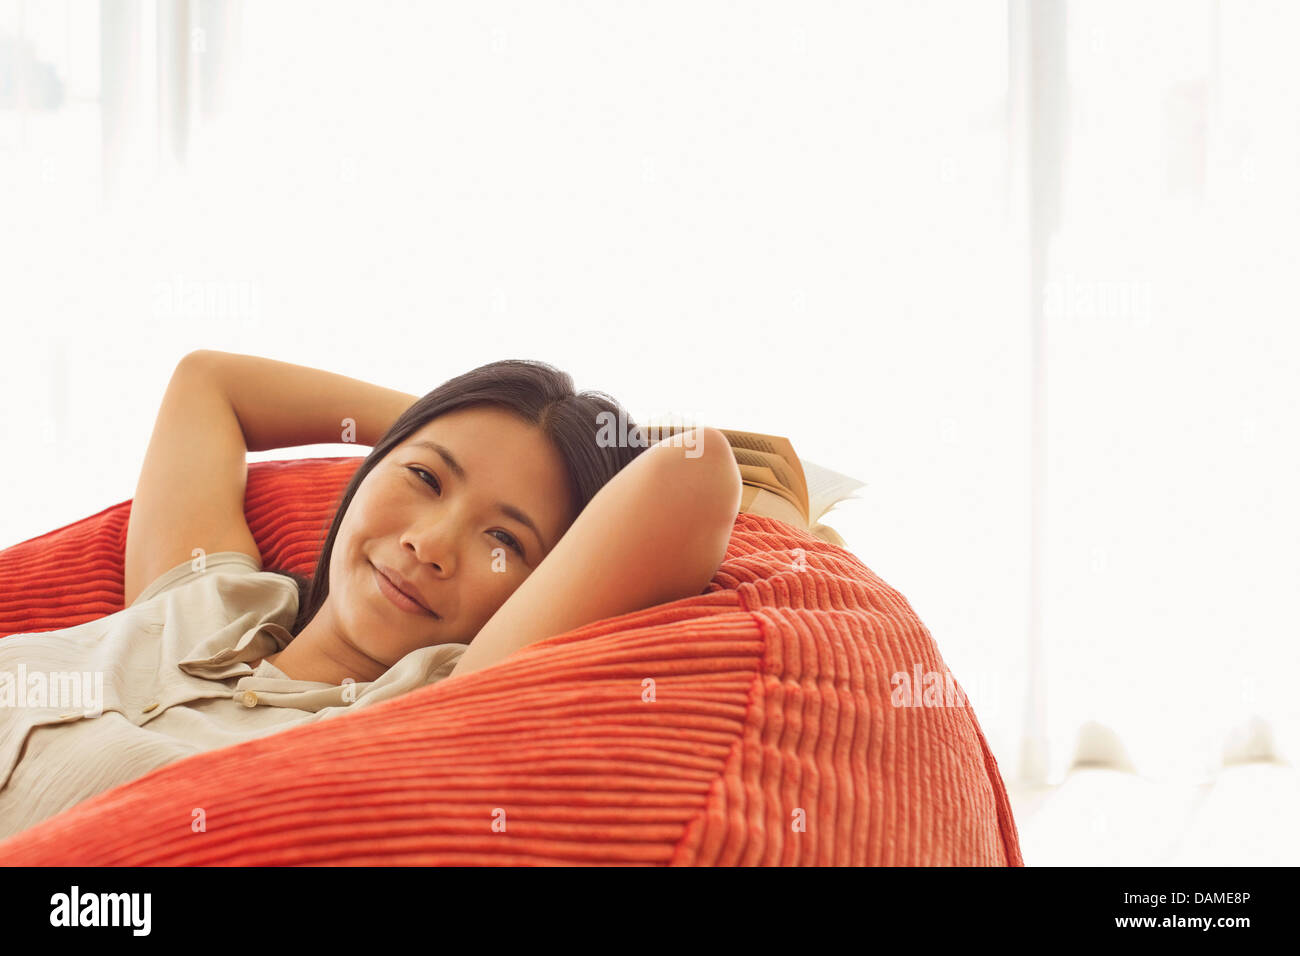 Smiling woman relaxing in beanbag chair Stock Photo